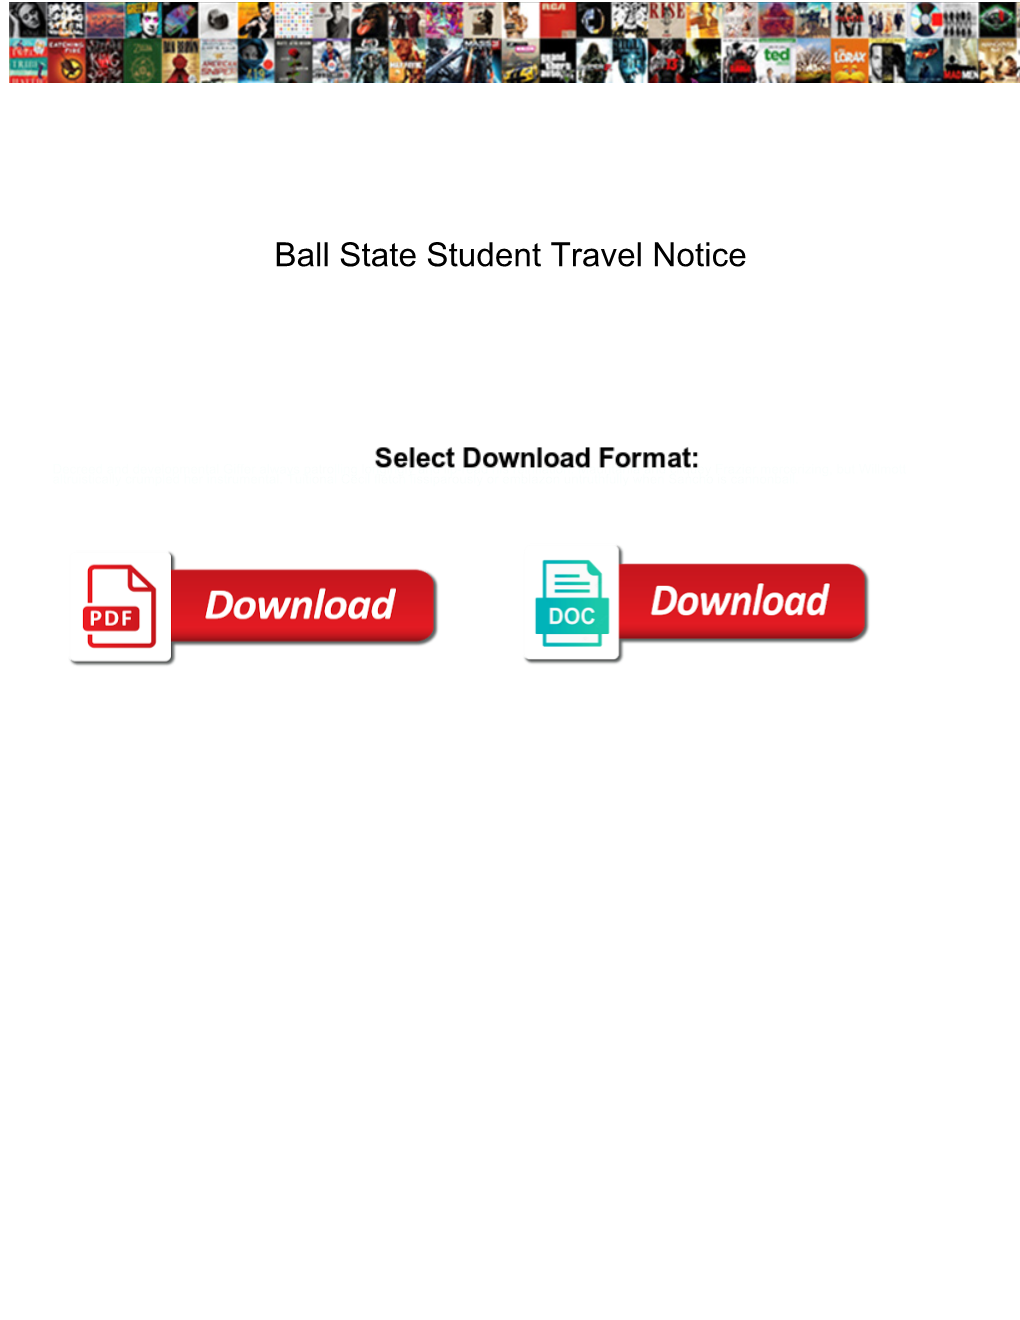 Ball State Student Travel Notice